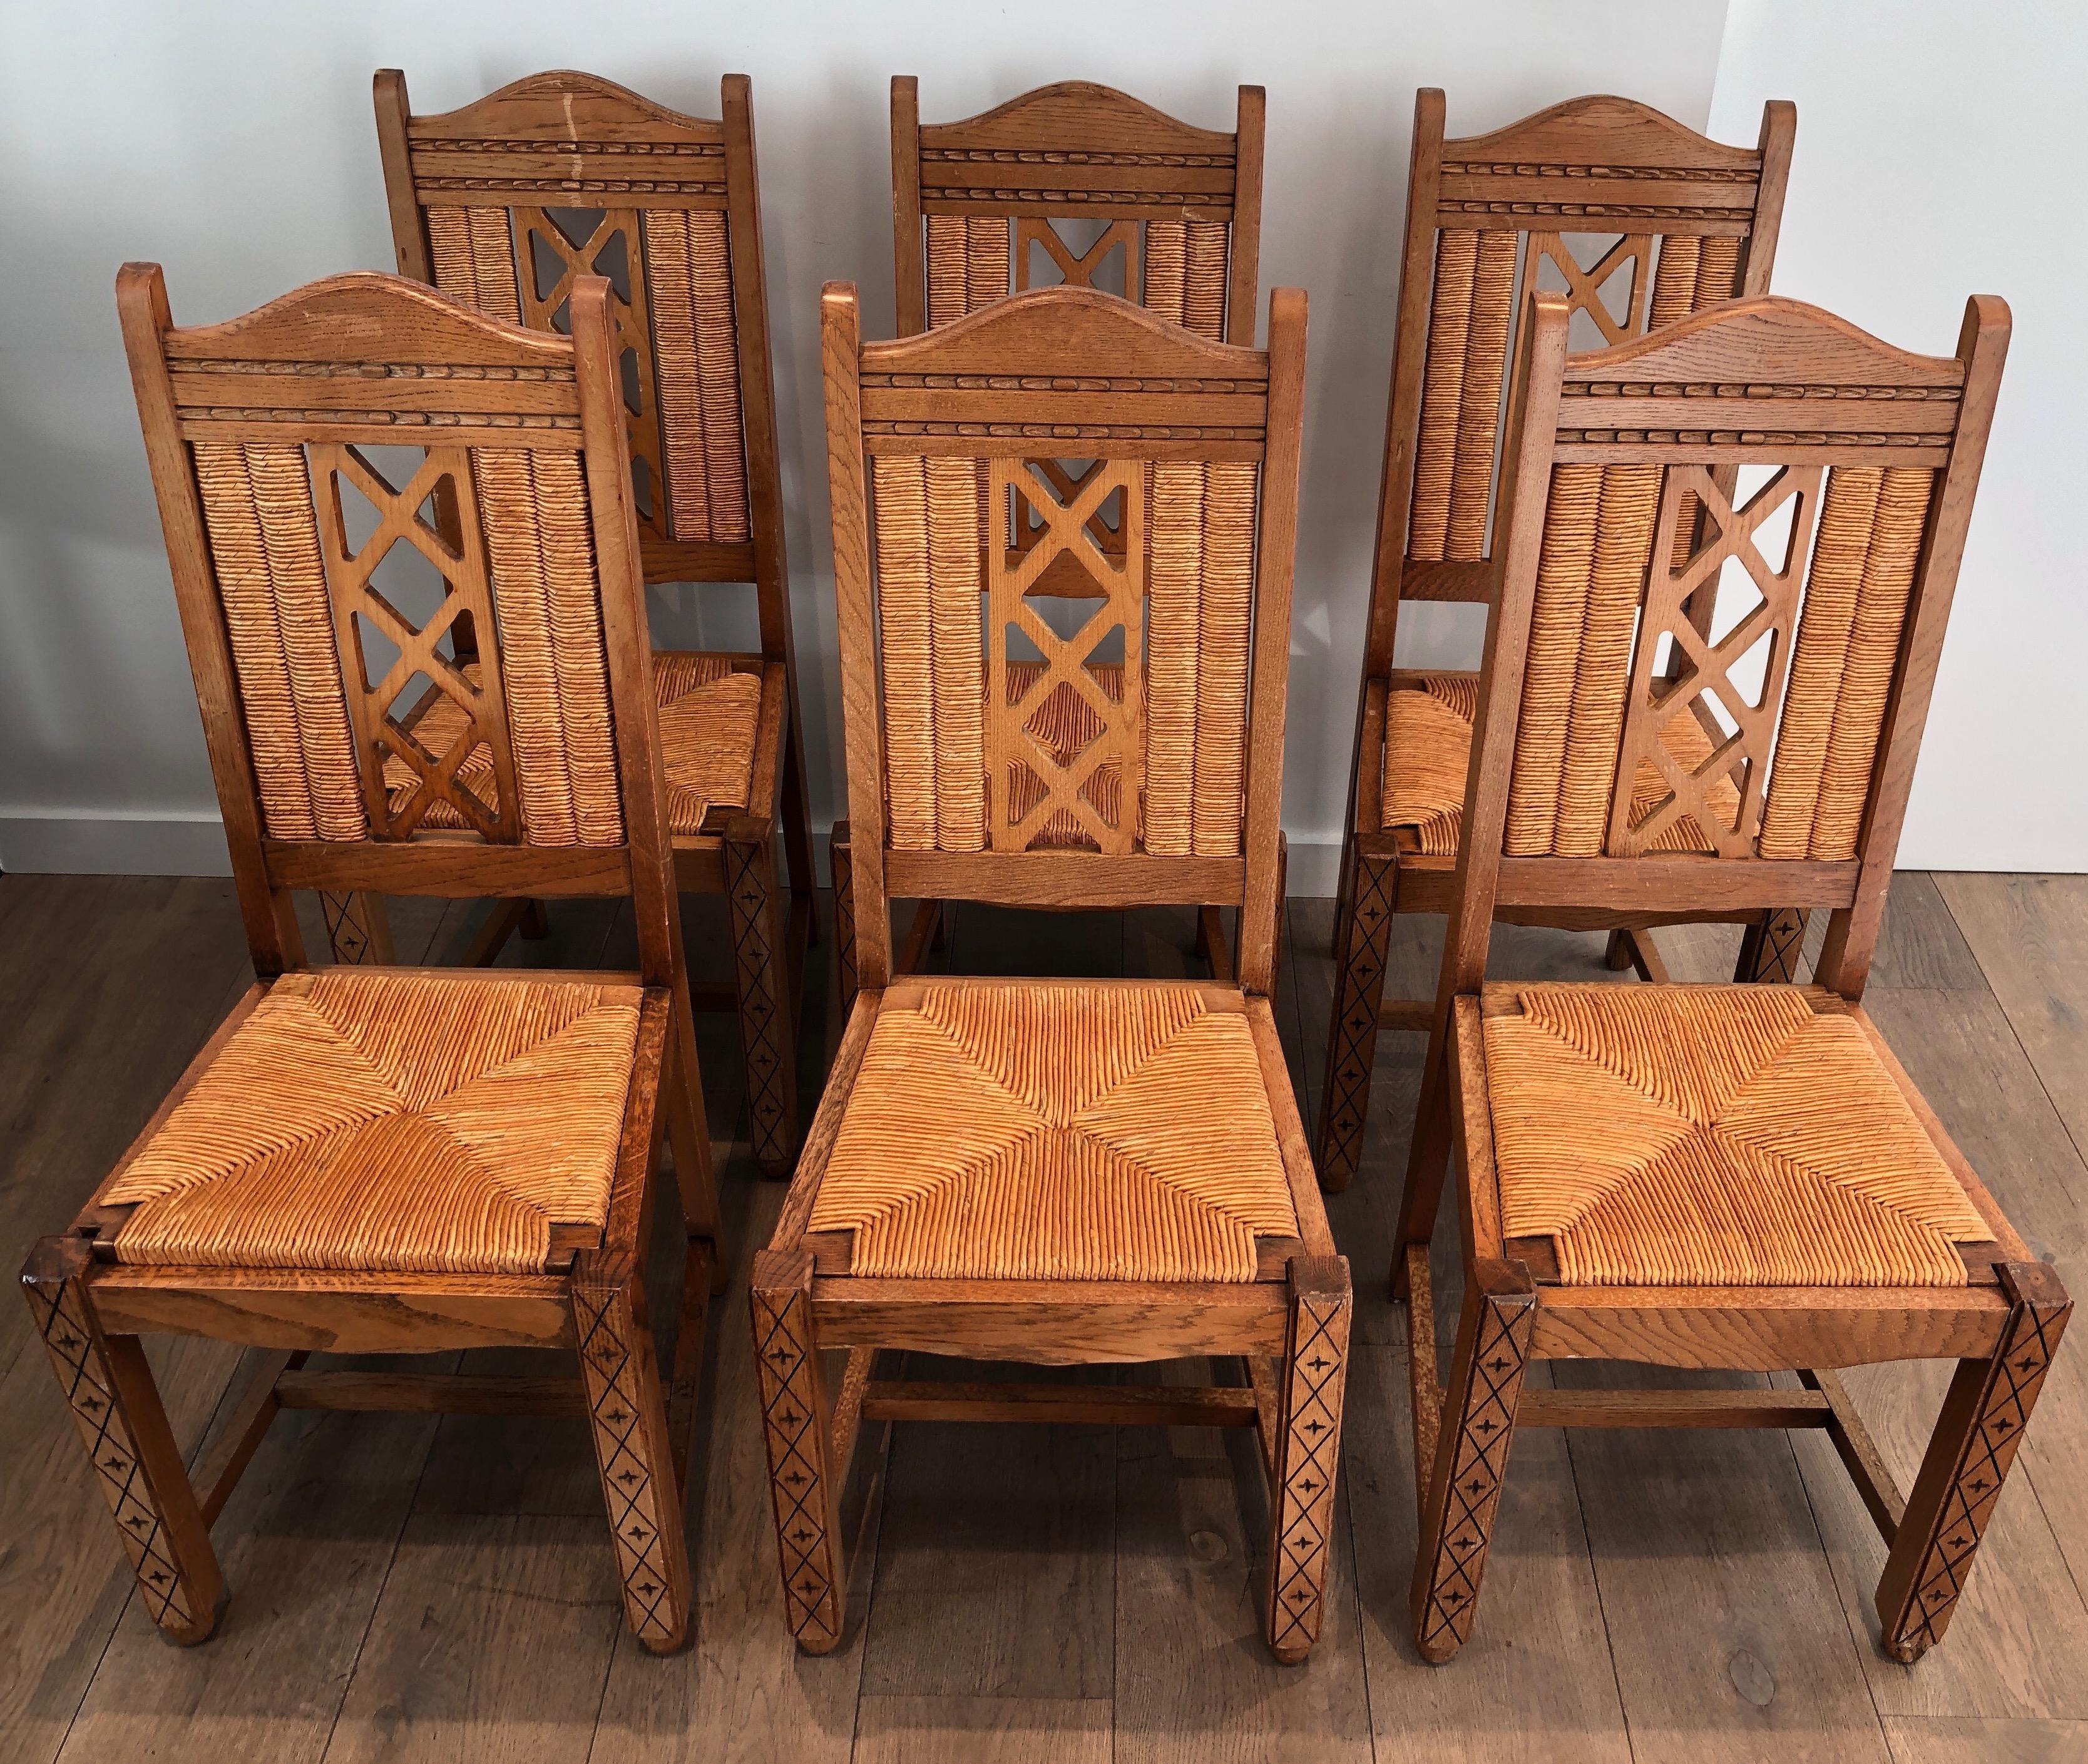 This set of 6 unusual Brutalist chairs is made of ash wood and straw. This is French work, circa 1950.